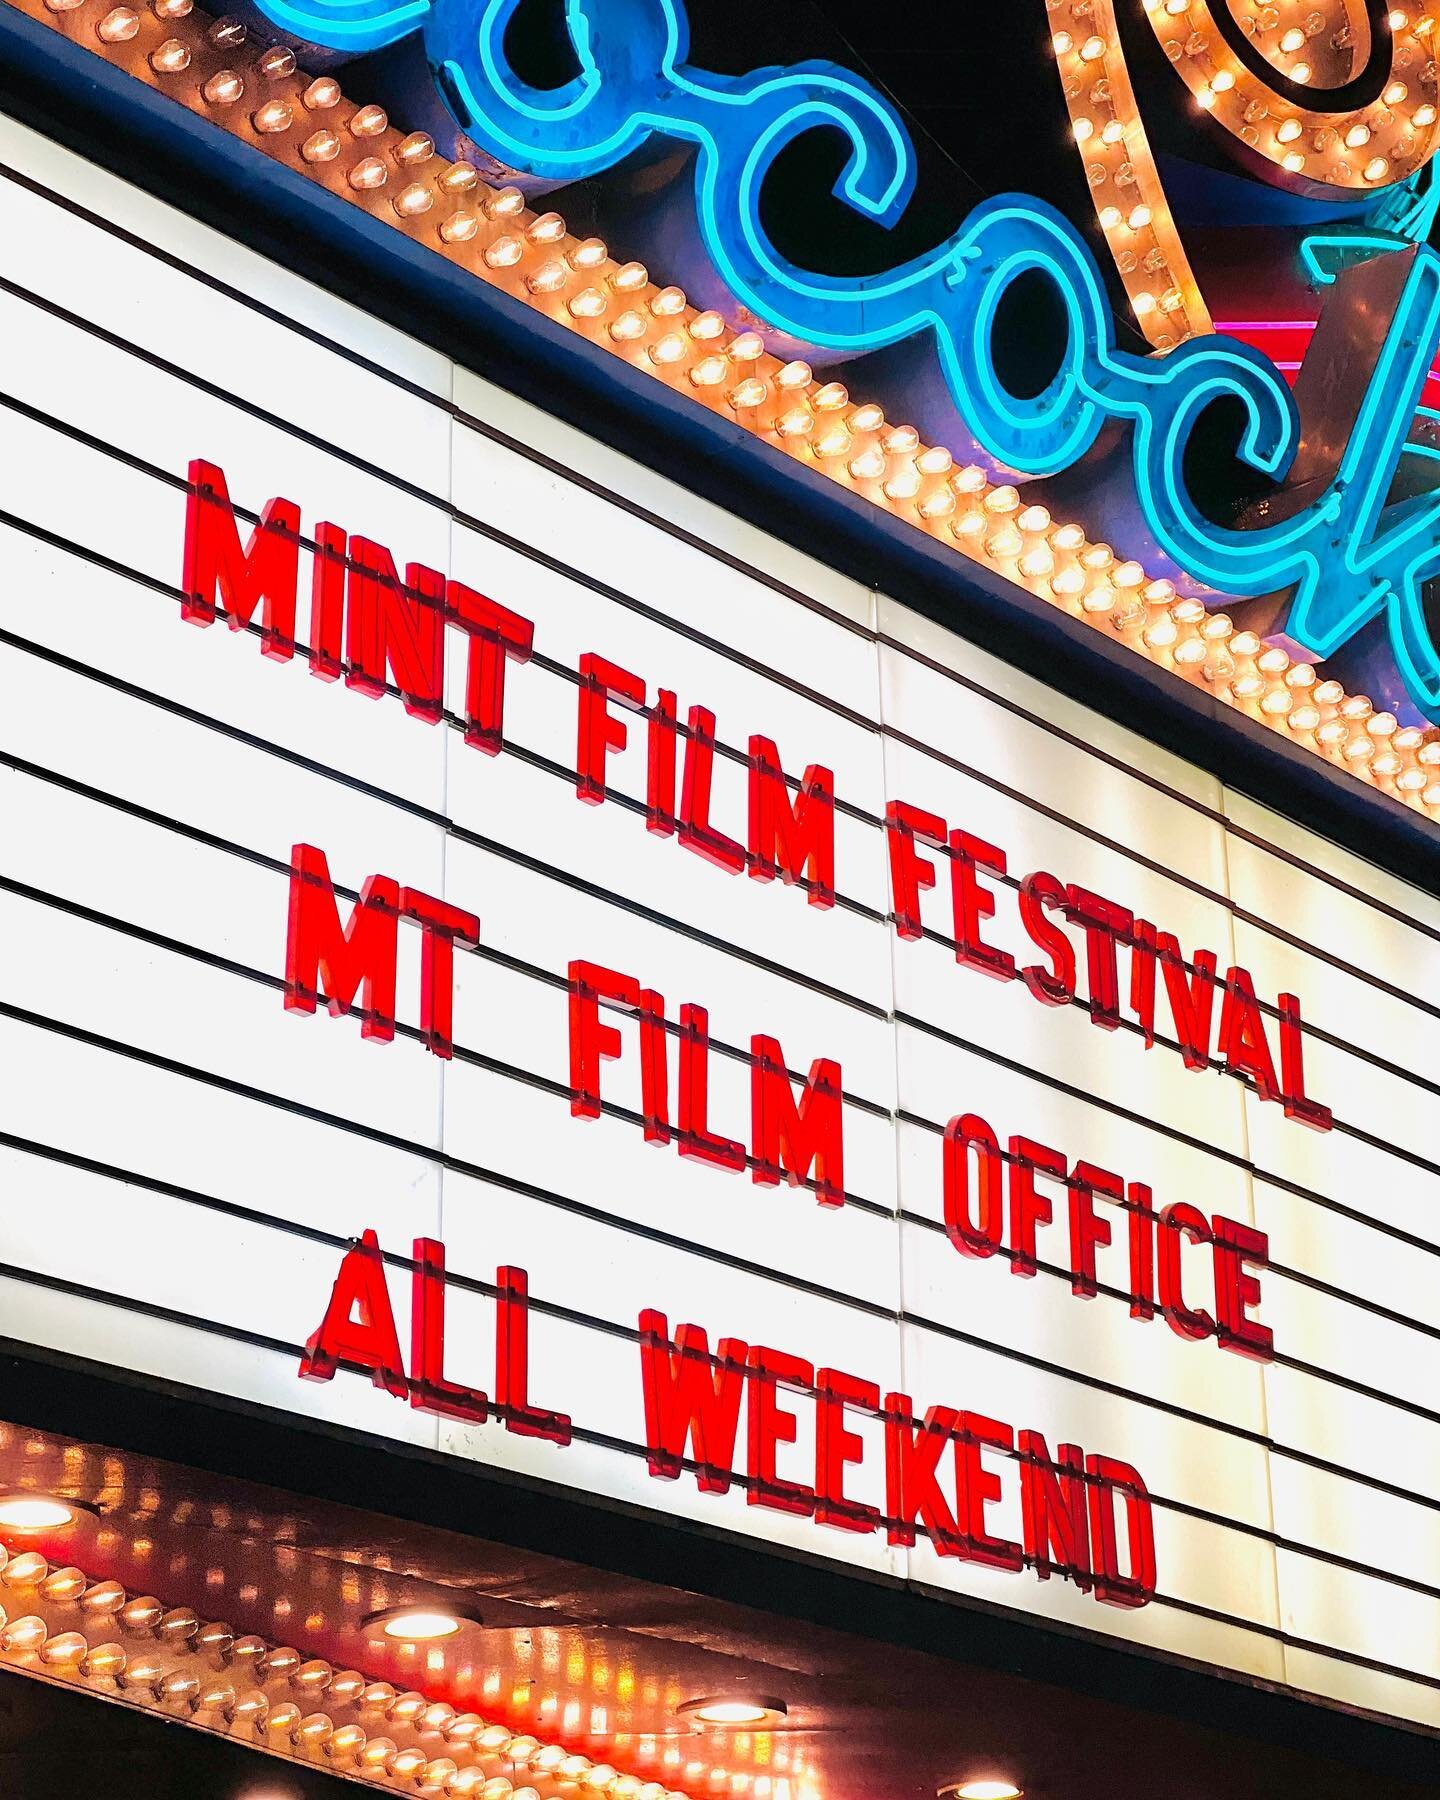 And that&rsquo;s a wrap on the 5th annual festival season! We&rsquo;ll, almost, we&rsquo;re announcing film awards this coming week, so stay tuned!

Huge shoutout to our presenting sponsor, @montanafilmoffice406! If you are interested in making a fil